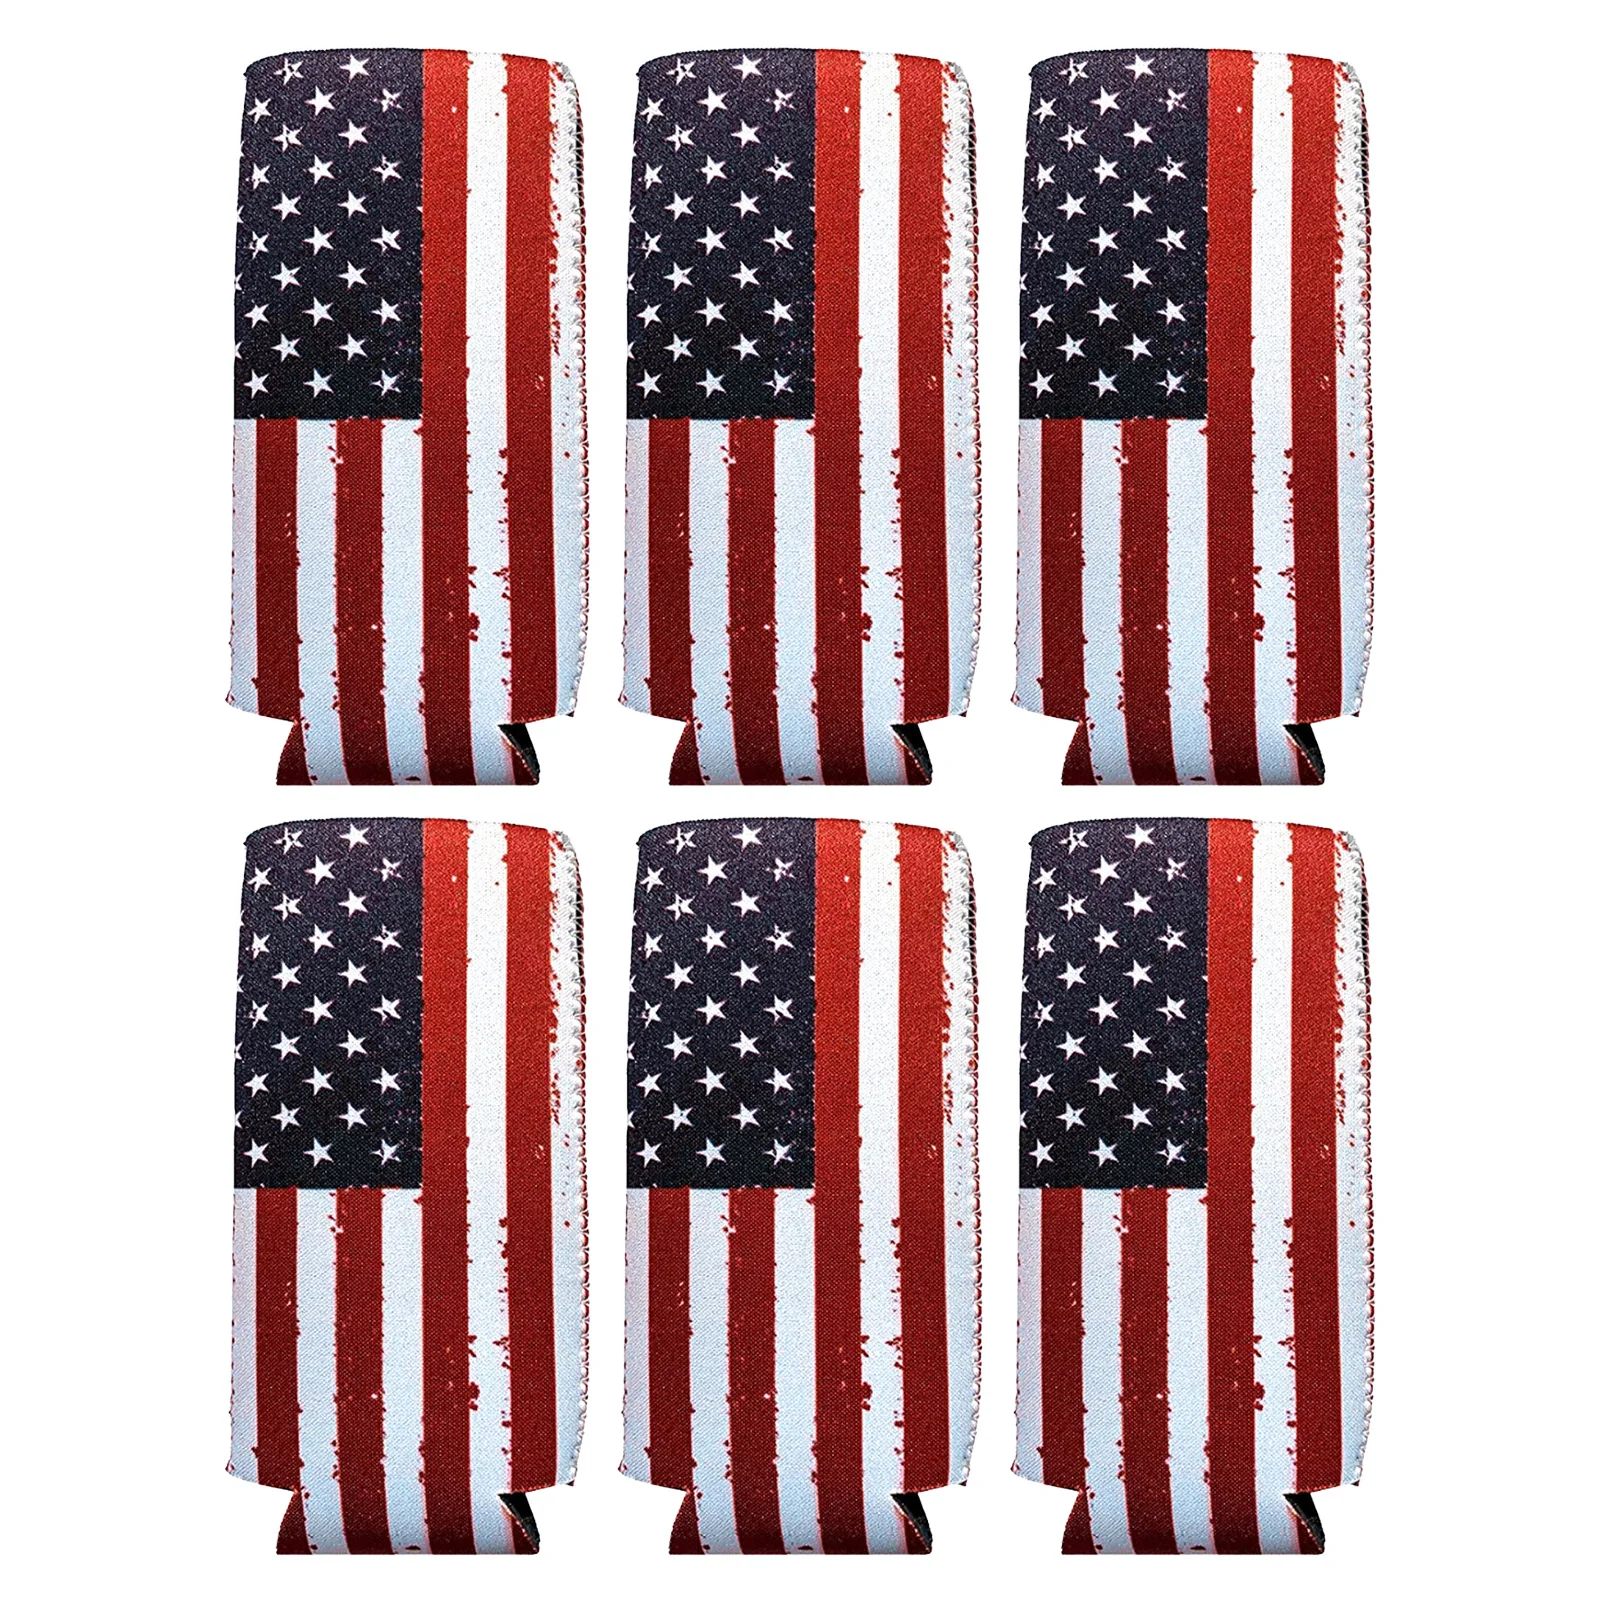 

Independence Day Skinny Can Sleeves Insulated Beer Can Sleeves 12oz 6pcs Drink Sleeves For Independence Day Gatherings Parties